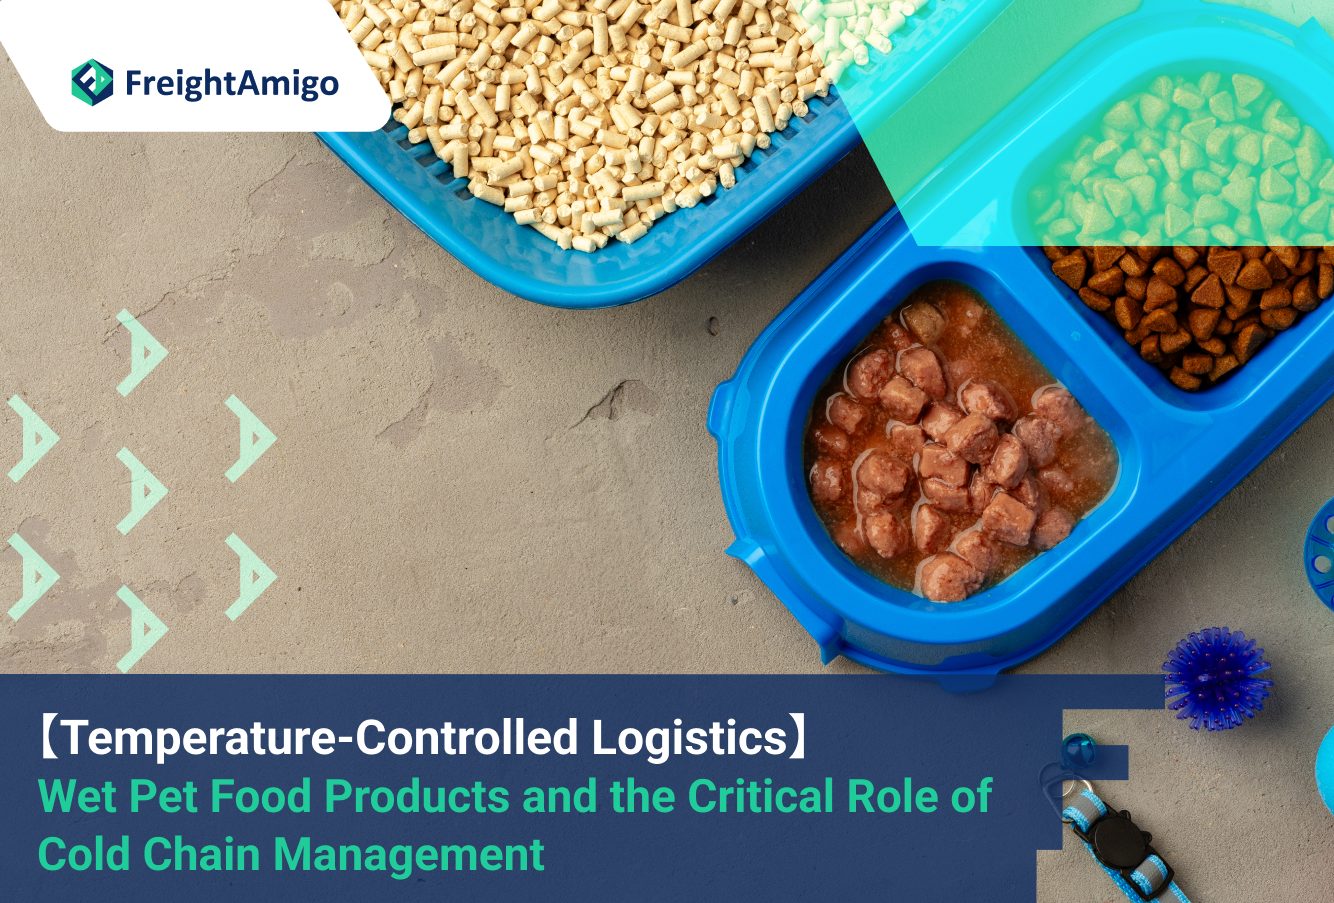 【Temperature-Controlled Logistics】 Wet Pet Food Products and the Critical Role of Cold Chain Management